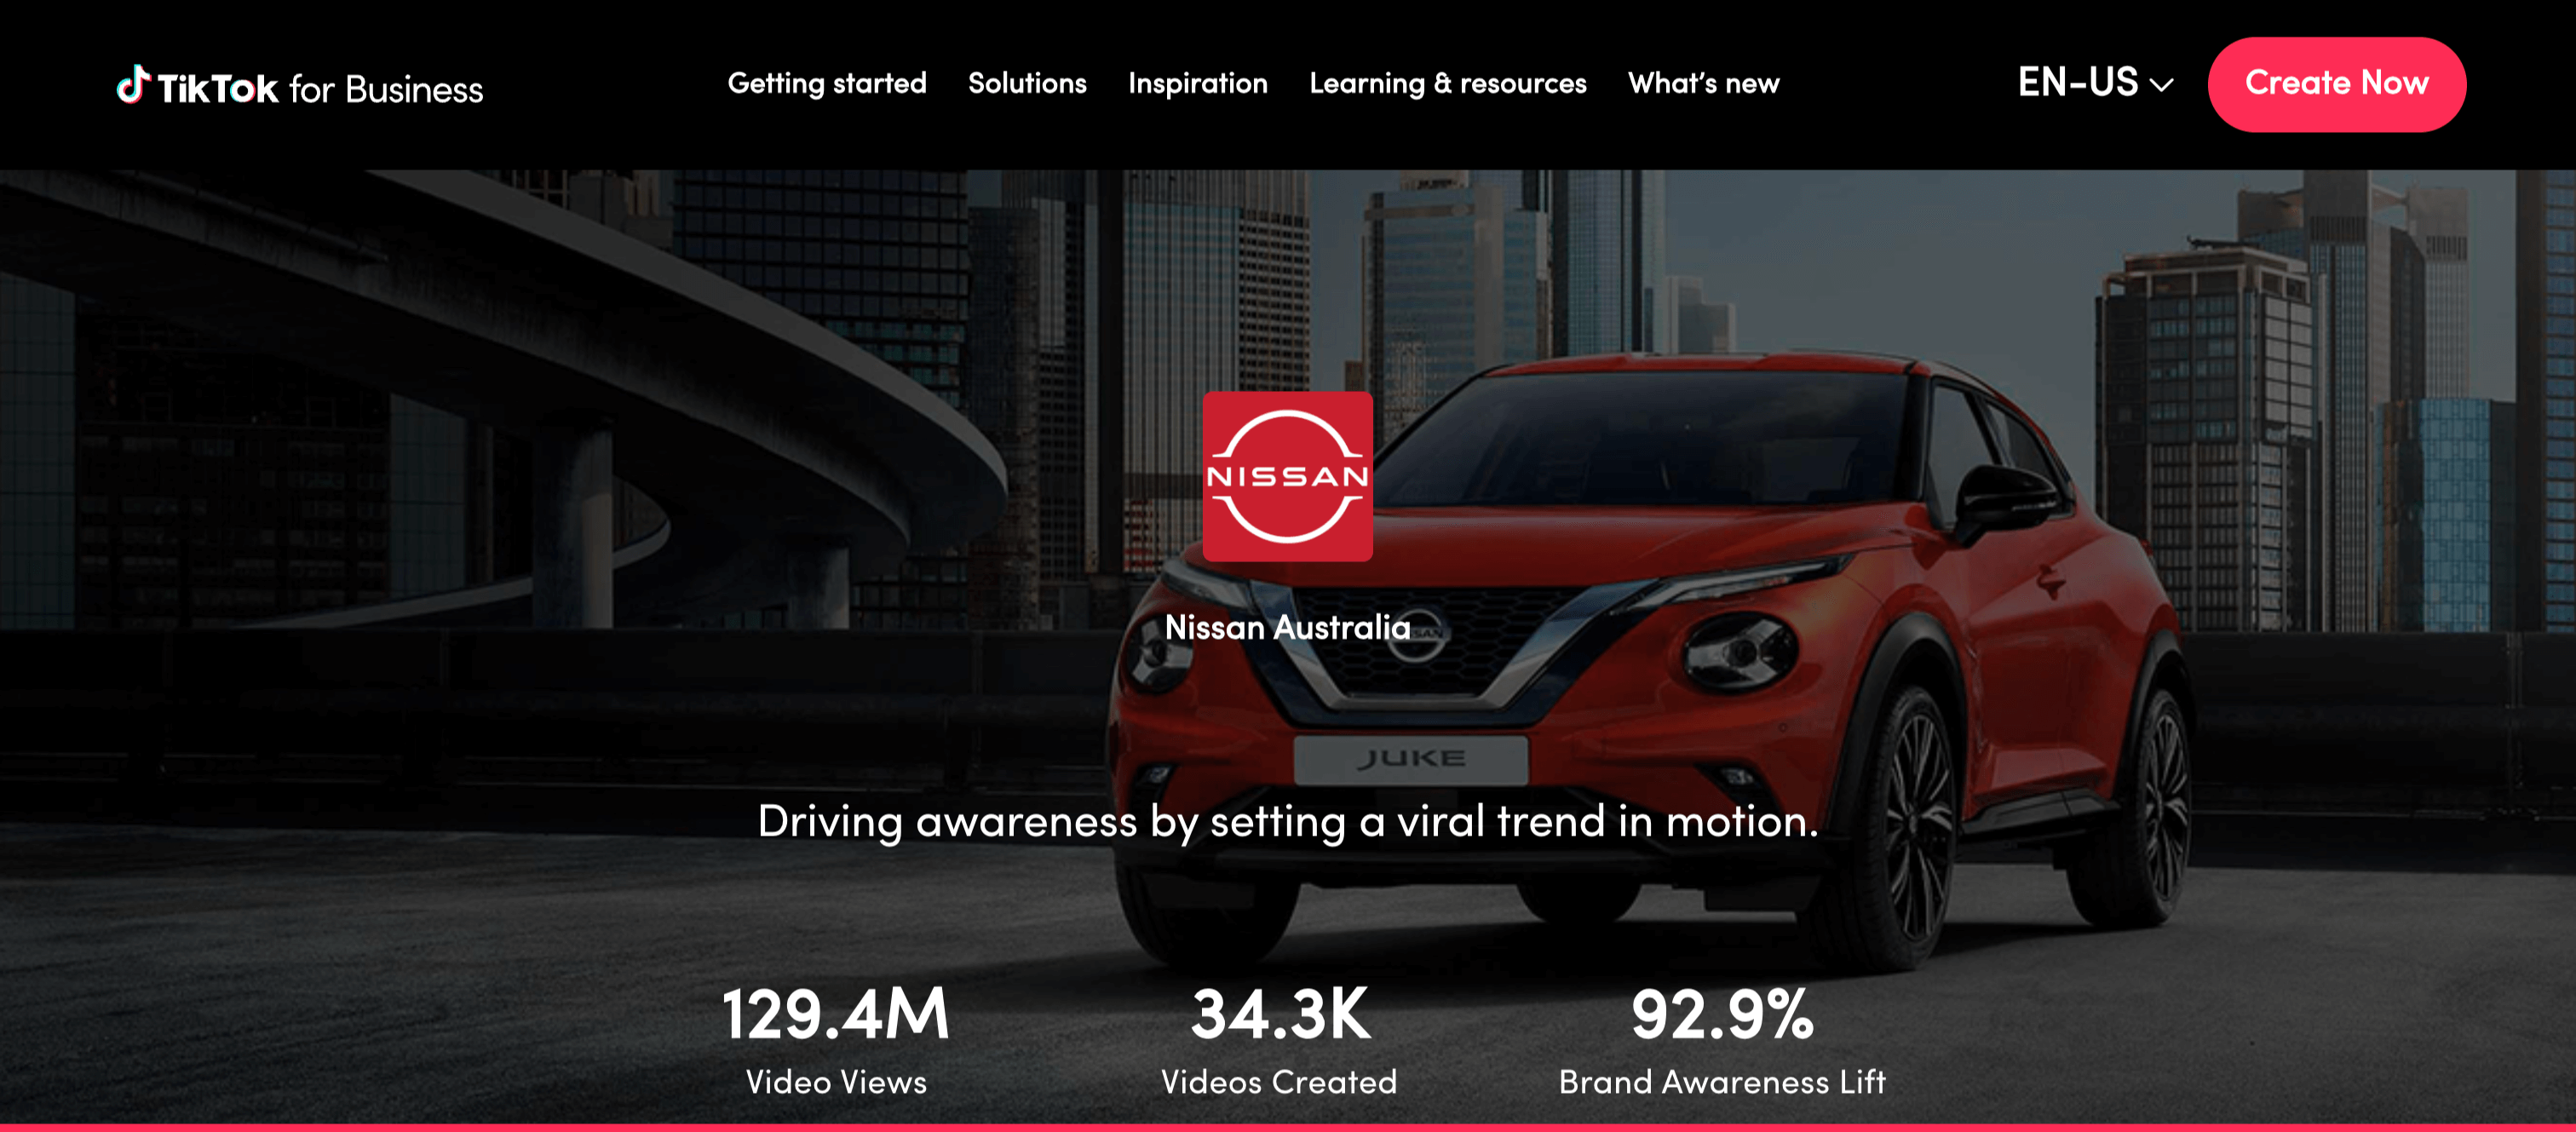 TikTok for business success story of Nissan with the motto "Driving awareness by setting a viral trend in motion" with results like 129.4M video views and 92.9% brand awareness lift.